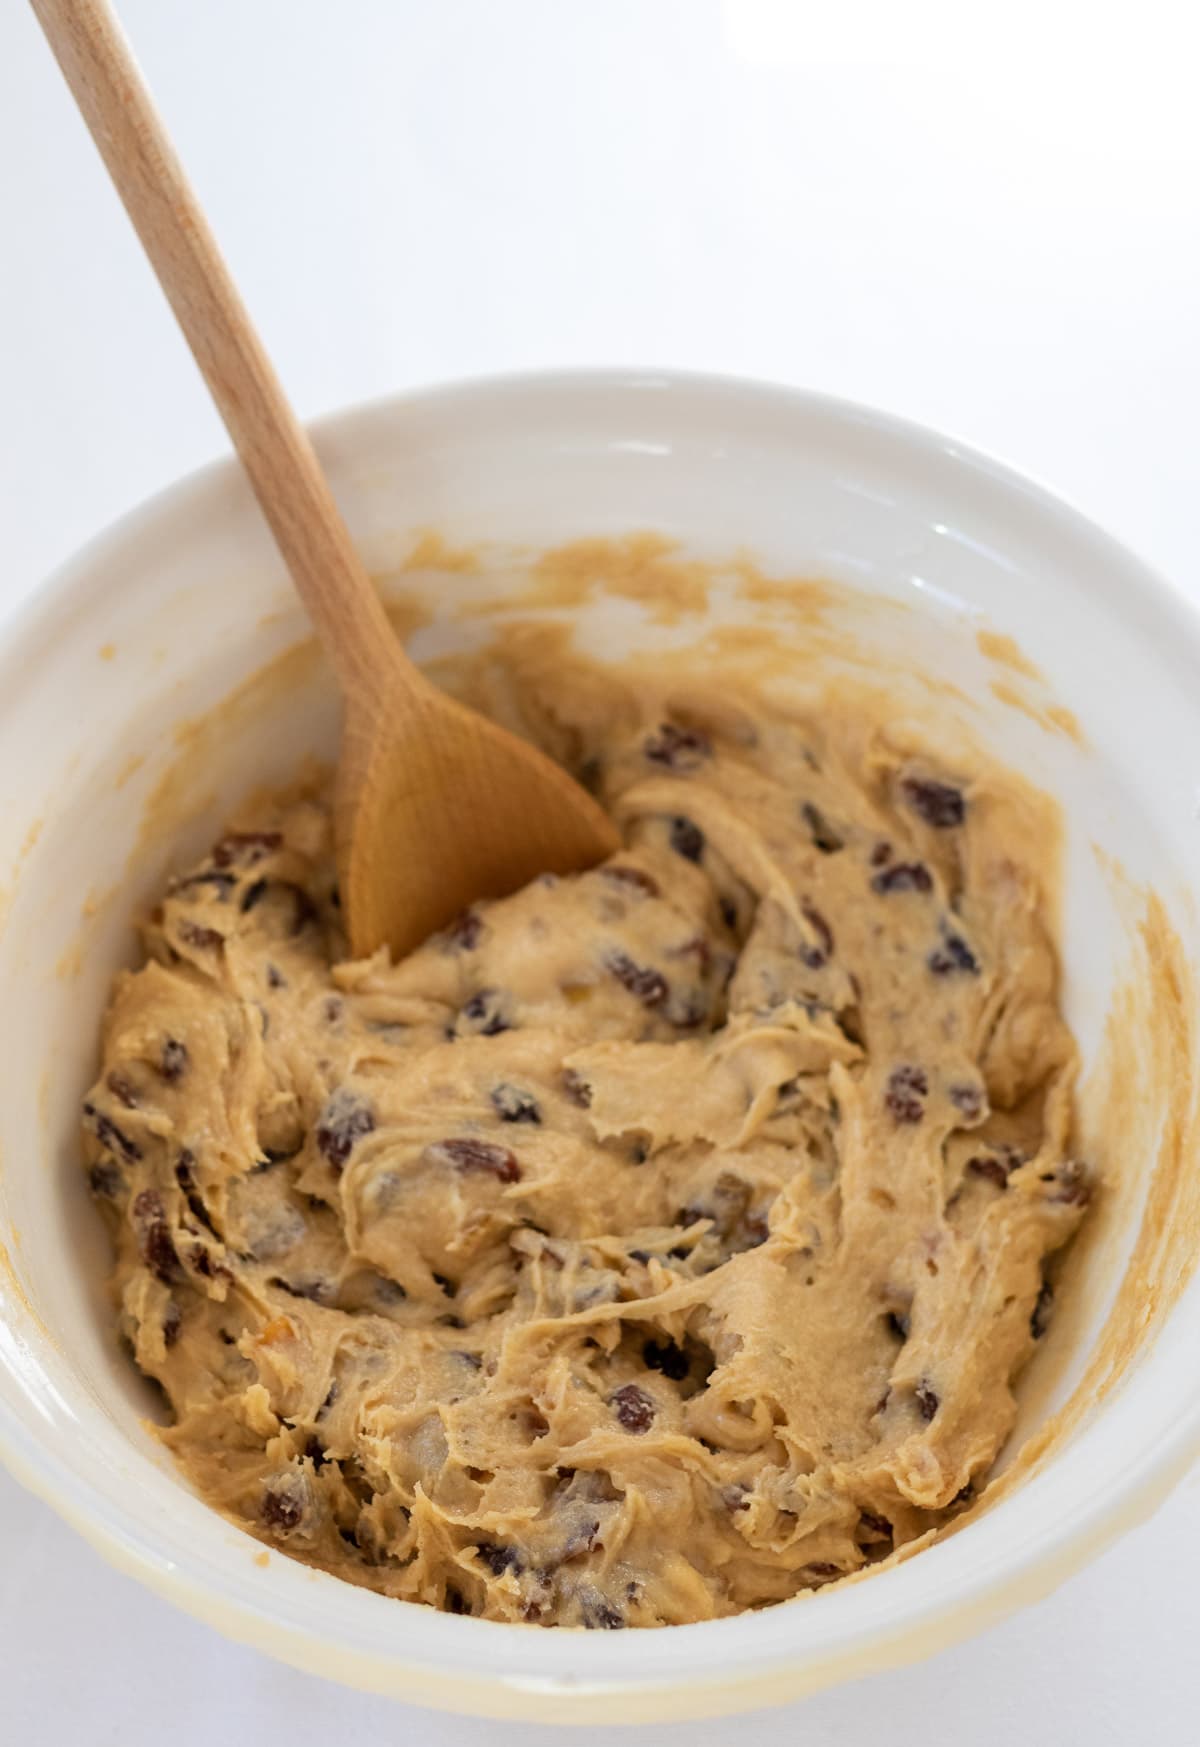 Dried fruit added into cake batter.